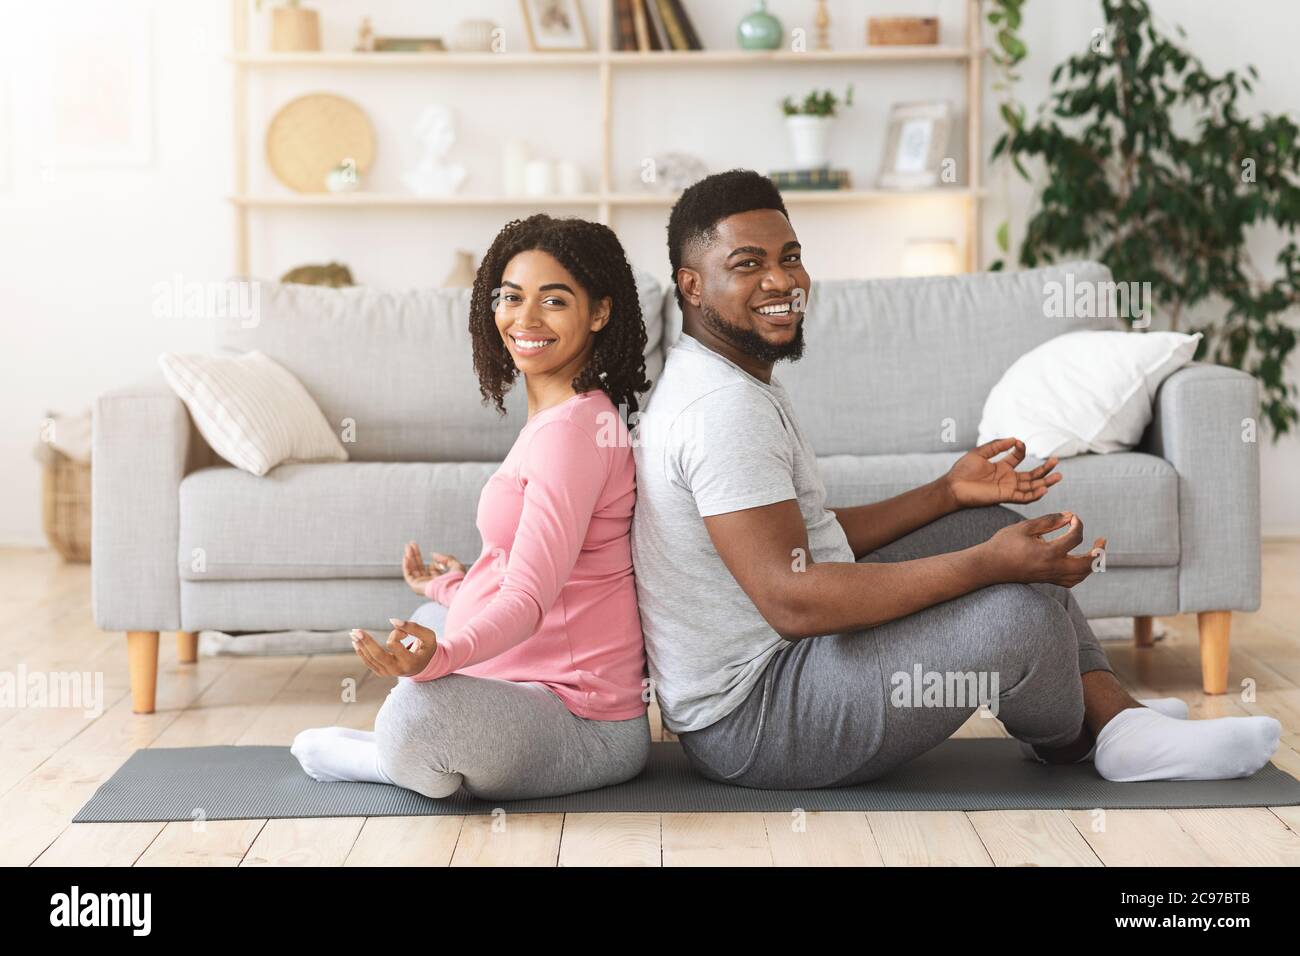 Cheerful african expecting couple exercising together at home Stock Photo